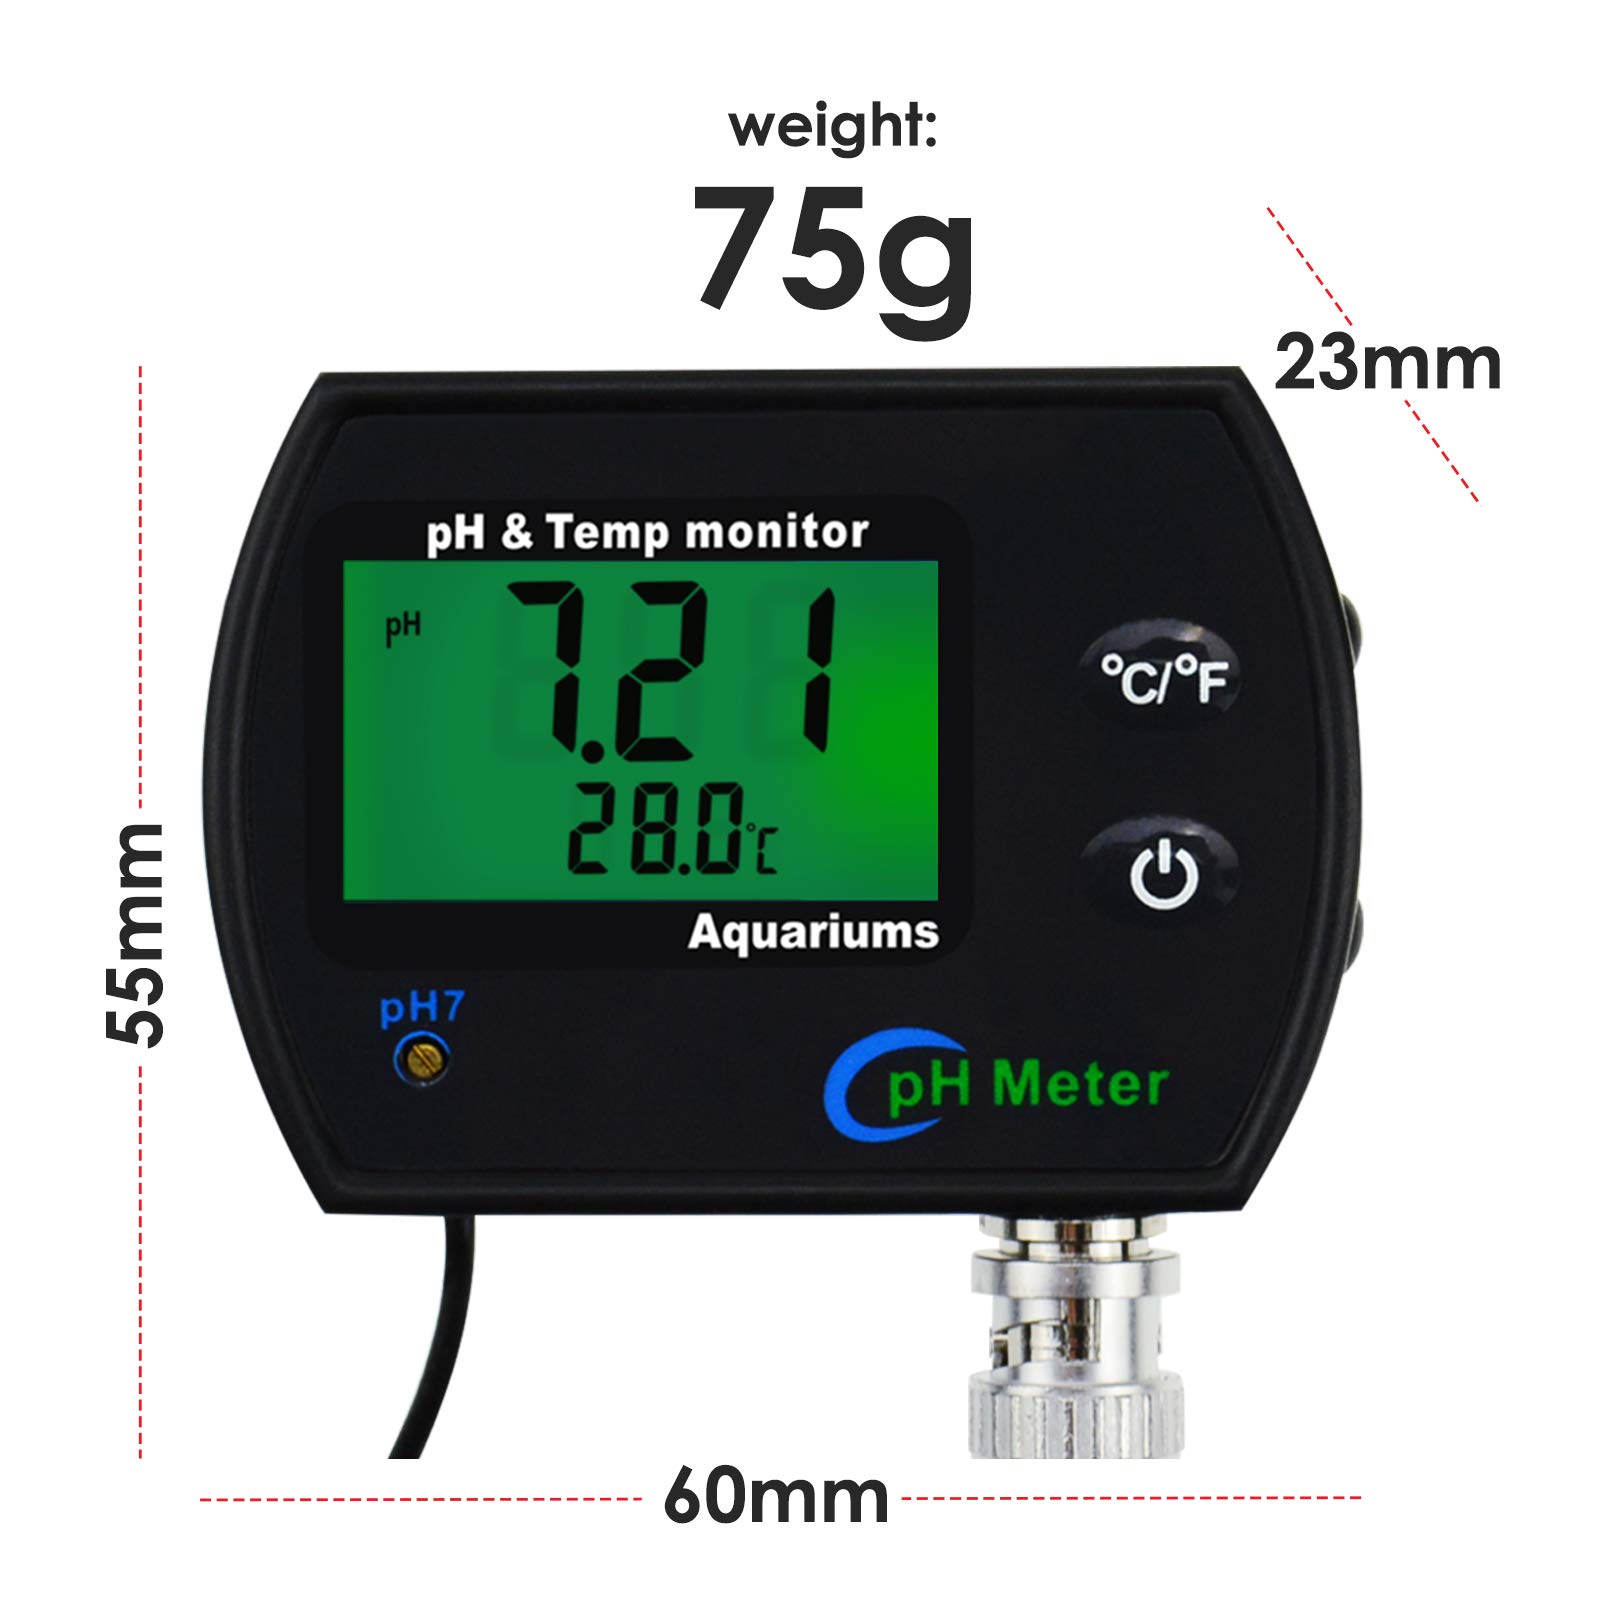 2-in-1 Combo pH & Temperature Meter Water Quality Tester Replaceable BNC pH Electrode for Aquariums Hydroponics Tanks Aquaculture Laboratory